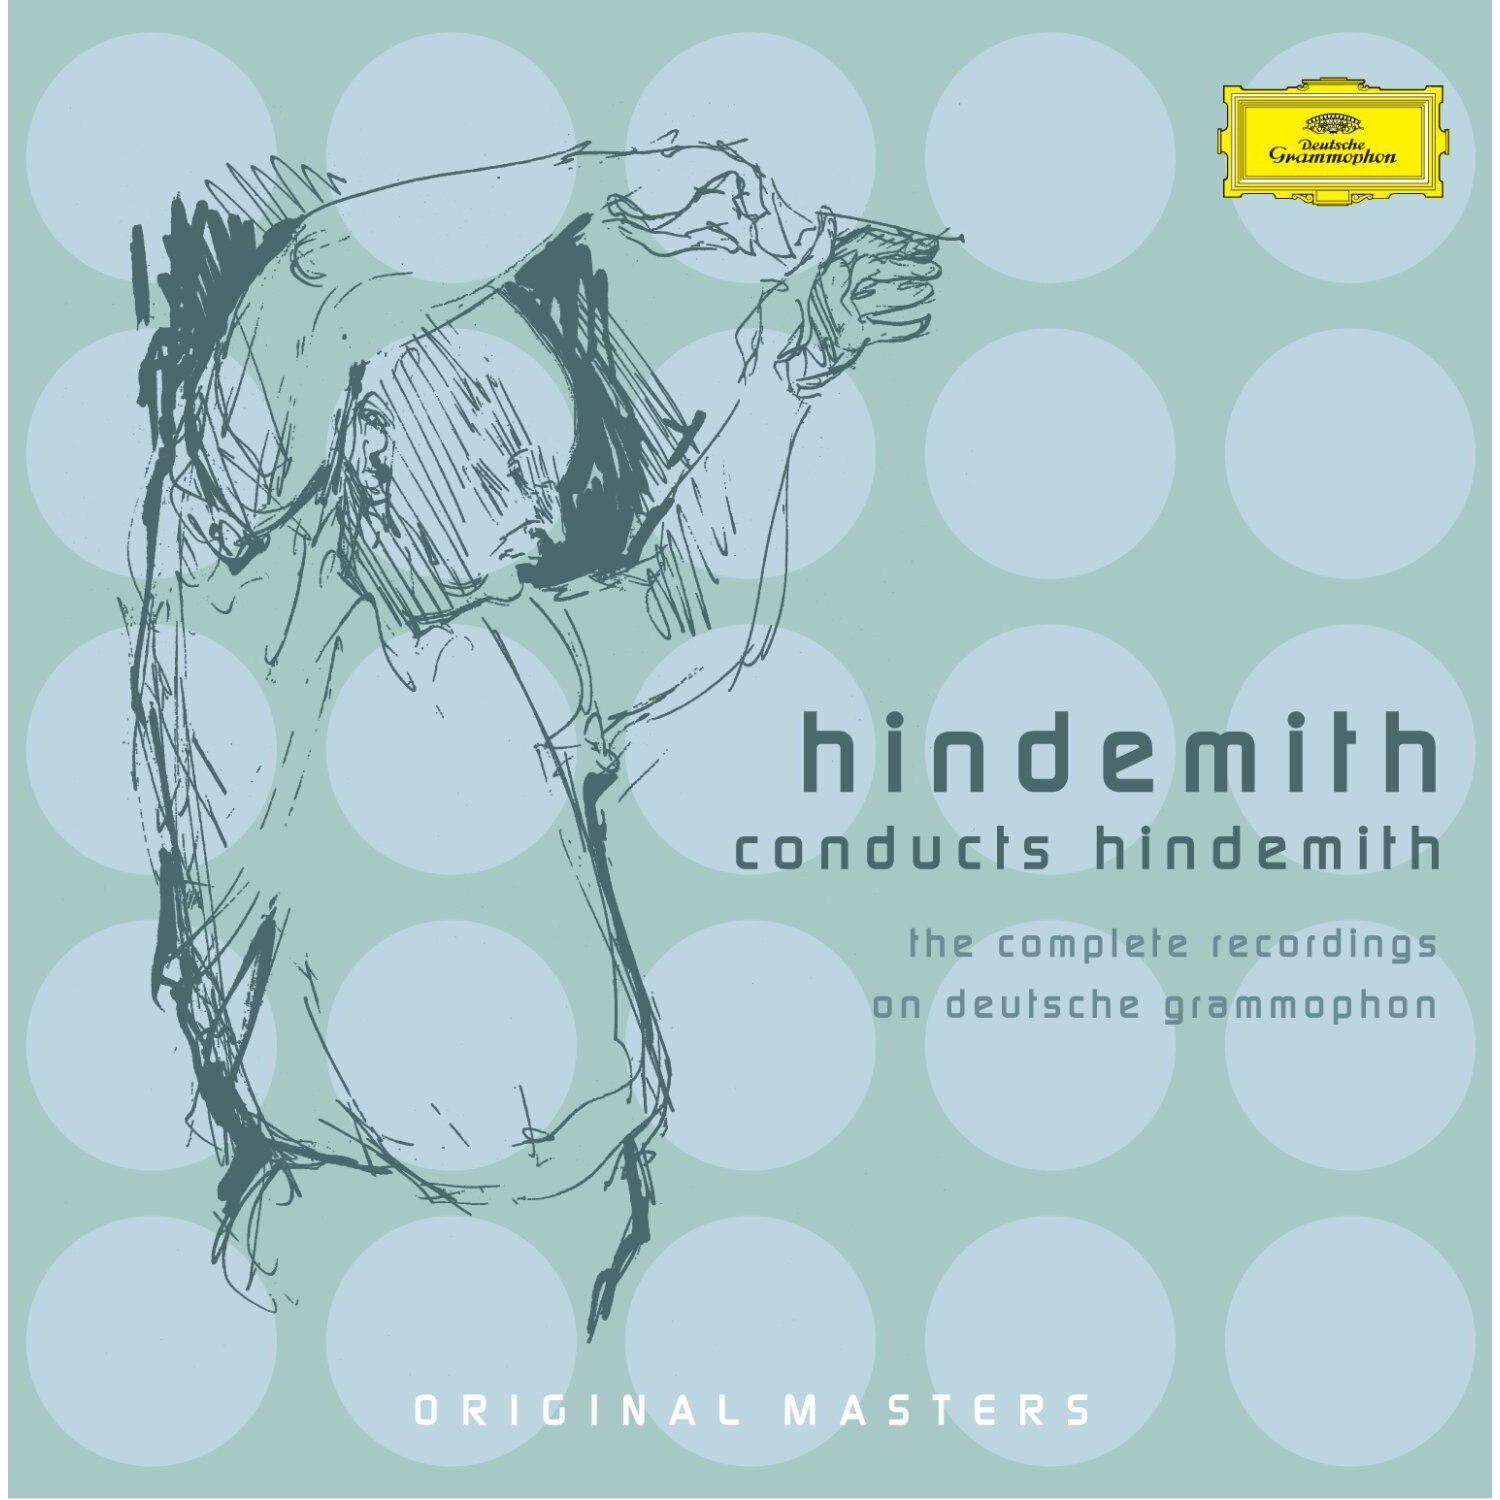 Paul　Hindemith　album　Hindemith　CD　conducts　Hindemith　Berliner　Philharmoniker,